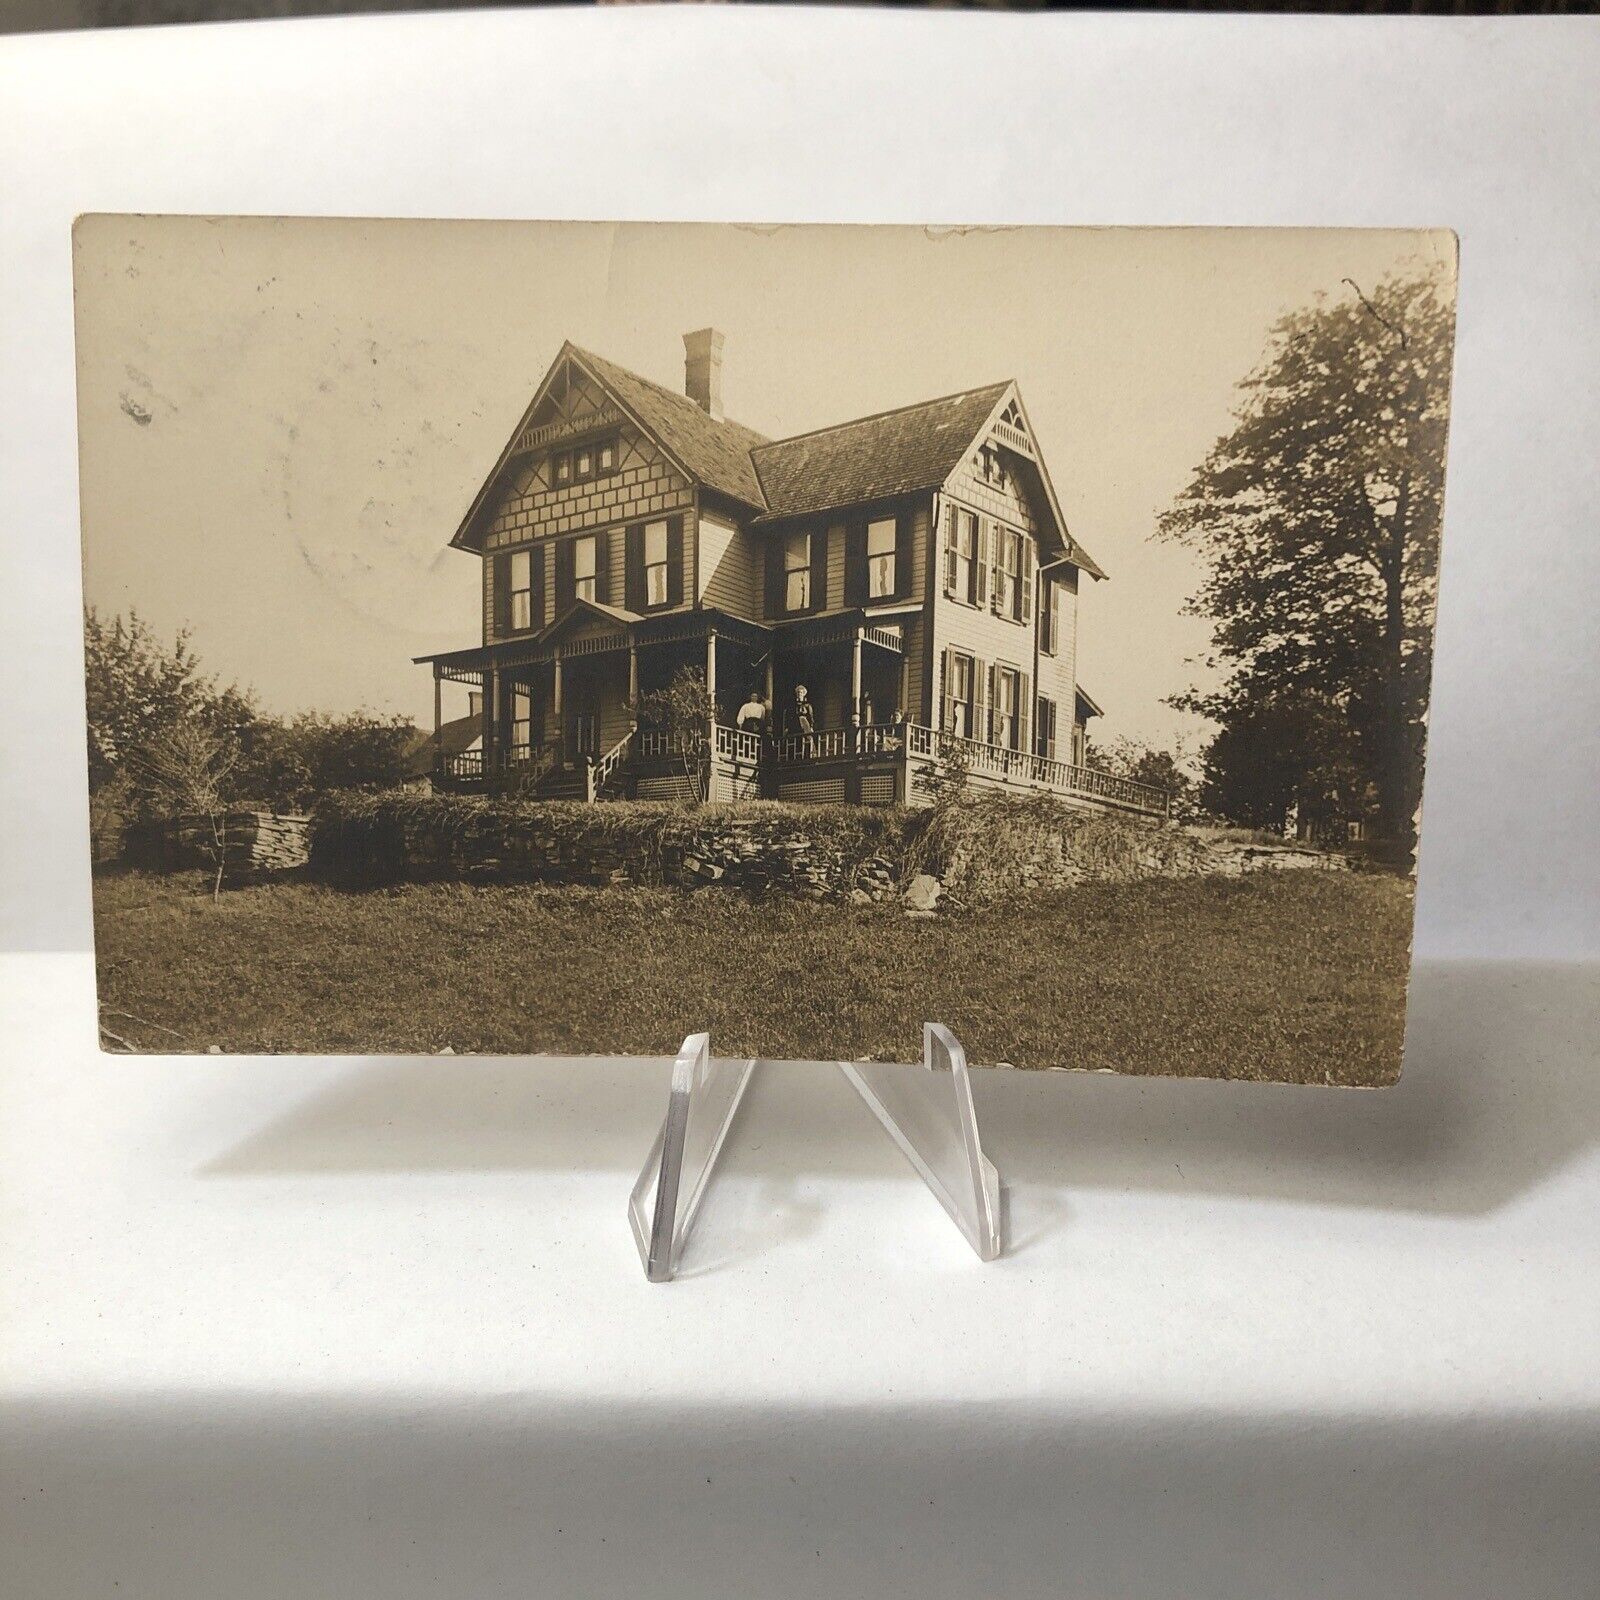 VINT REAL PHOTO .01 POSTCARD 1909USED PHOTO OF A HOUSE UNK. LOCATION